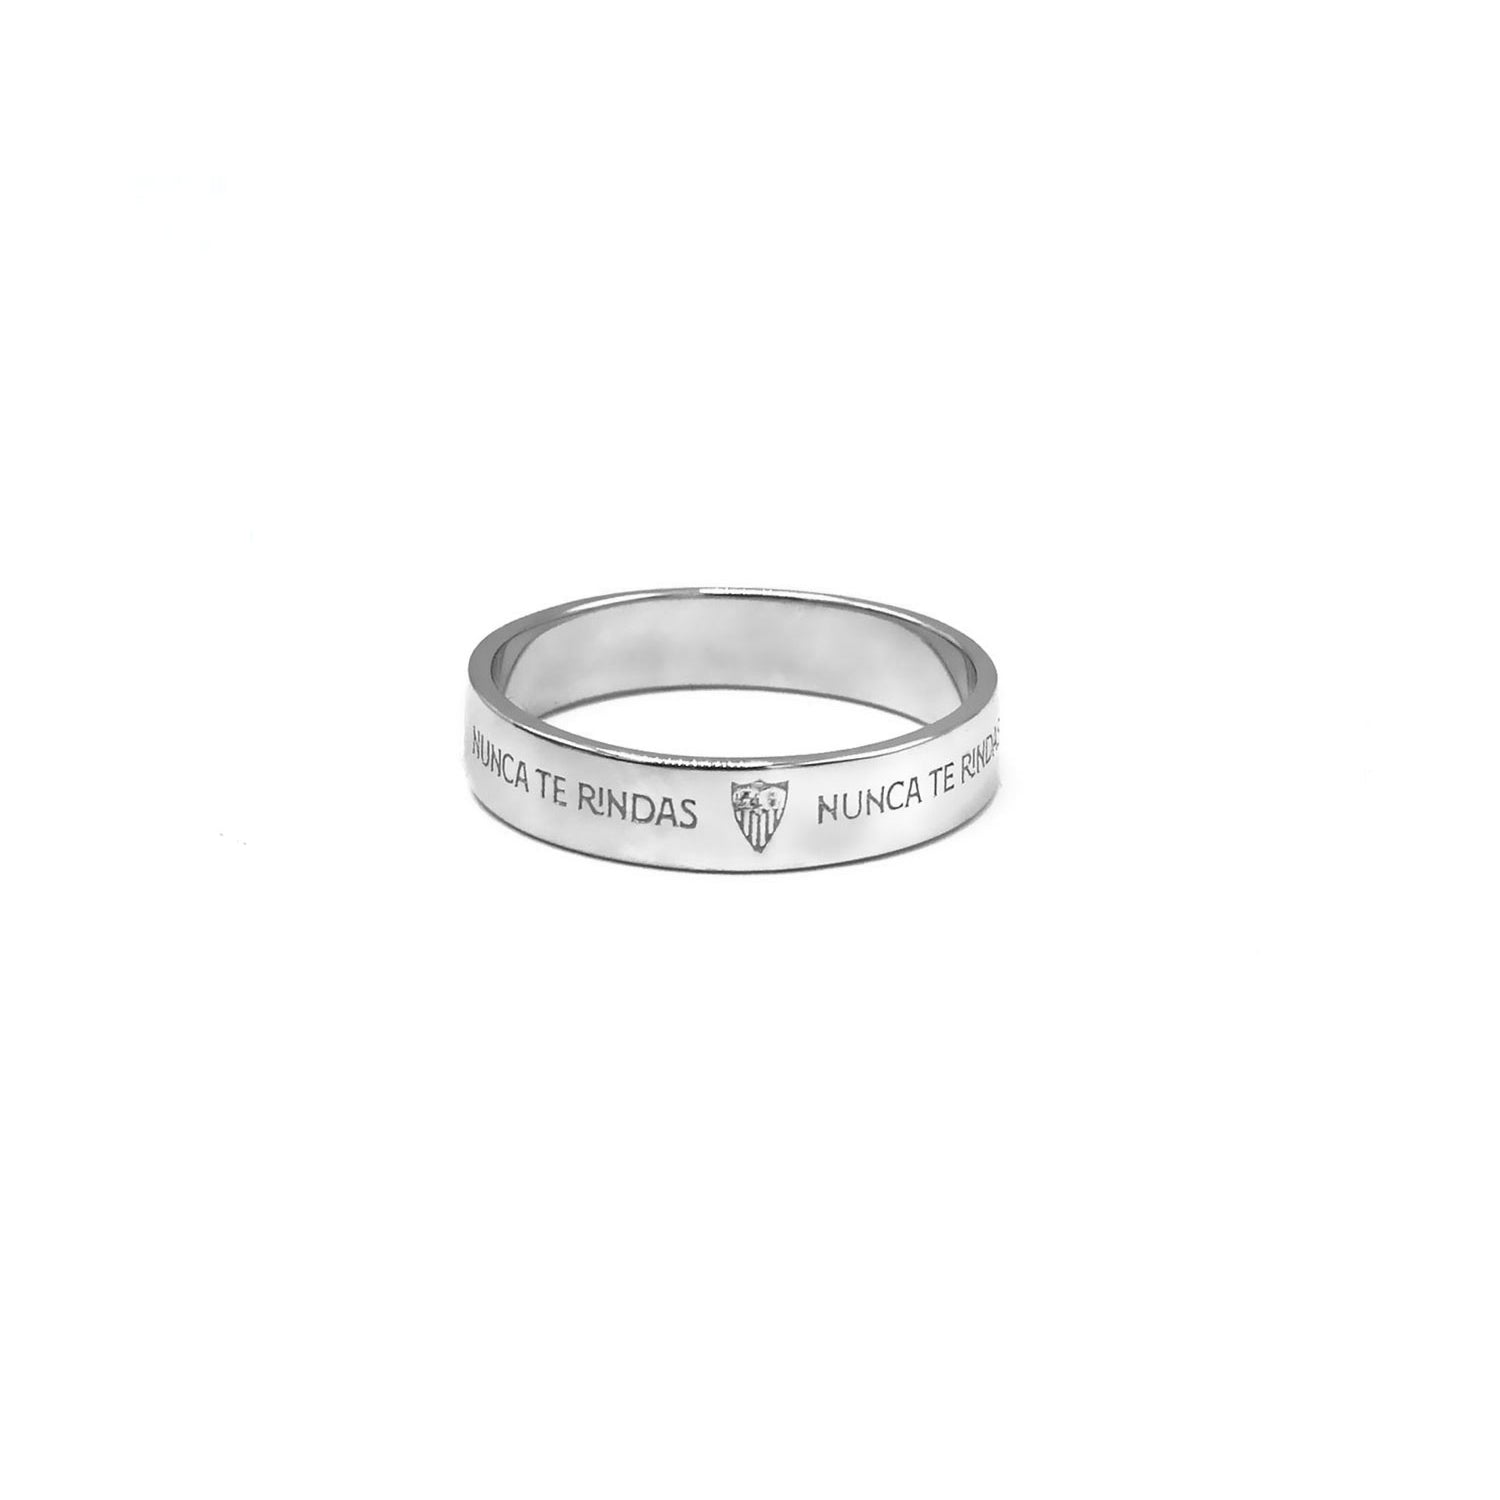 Silver ring with exterior engraving